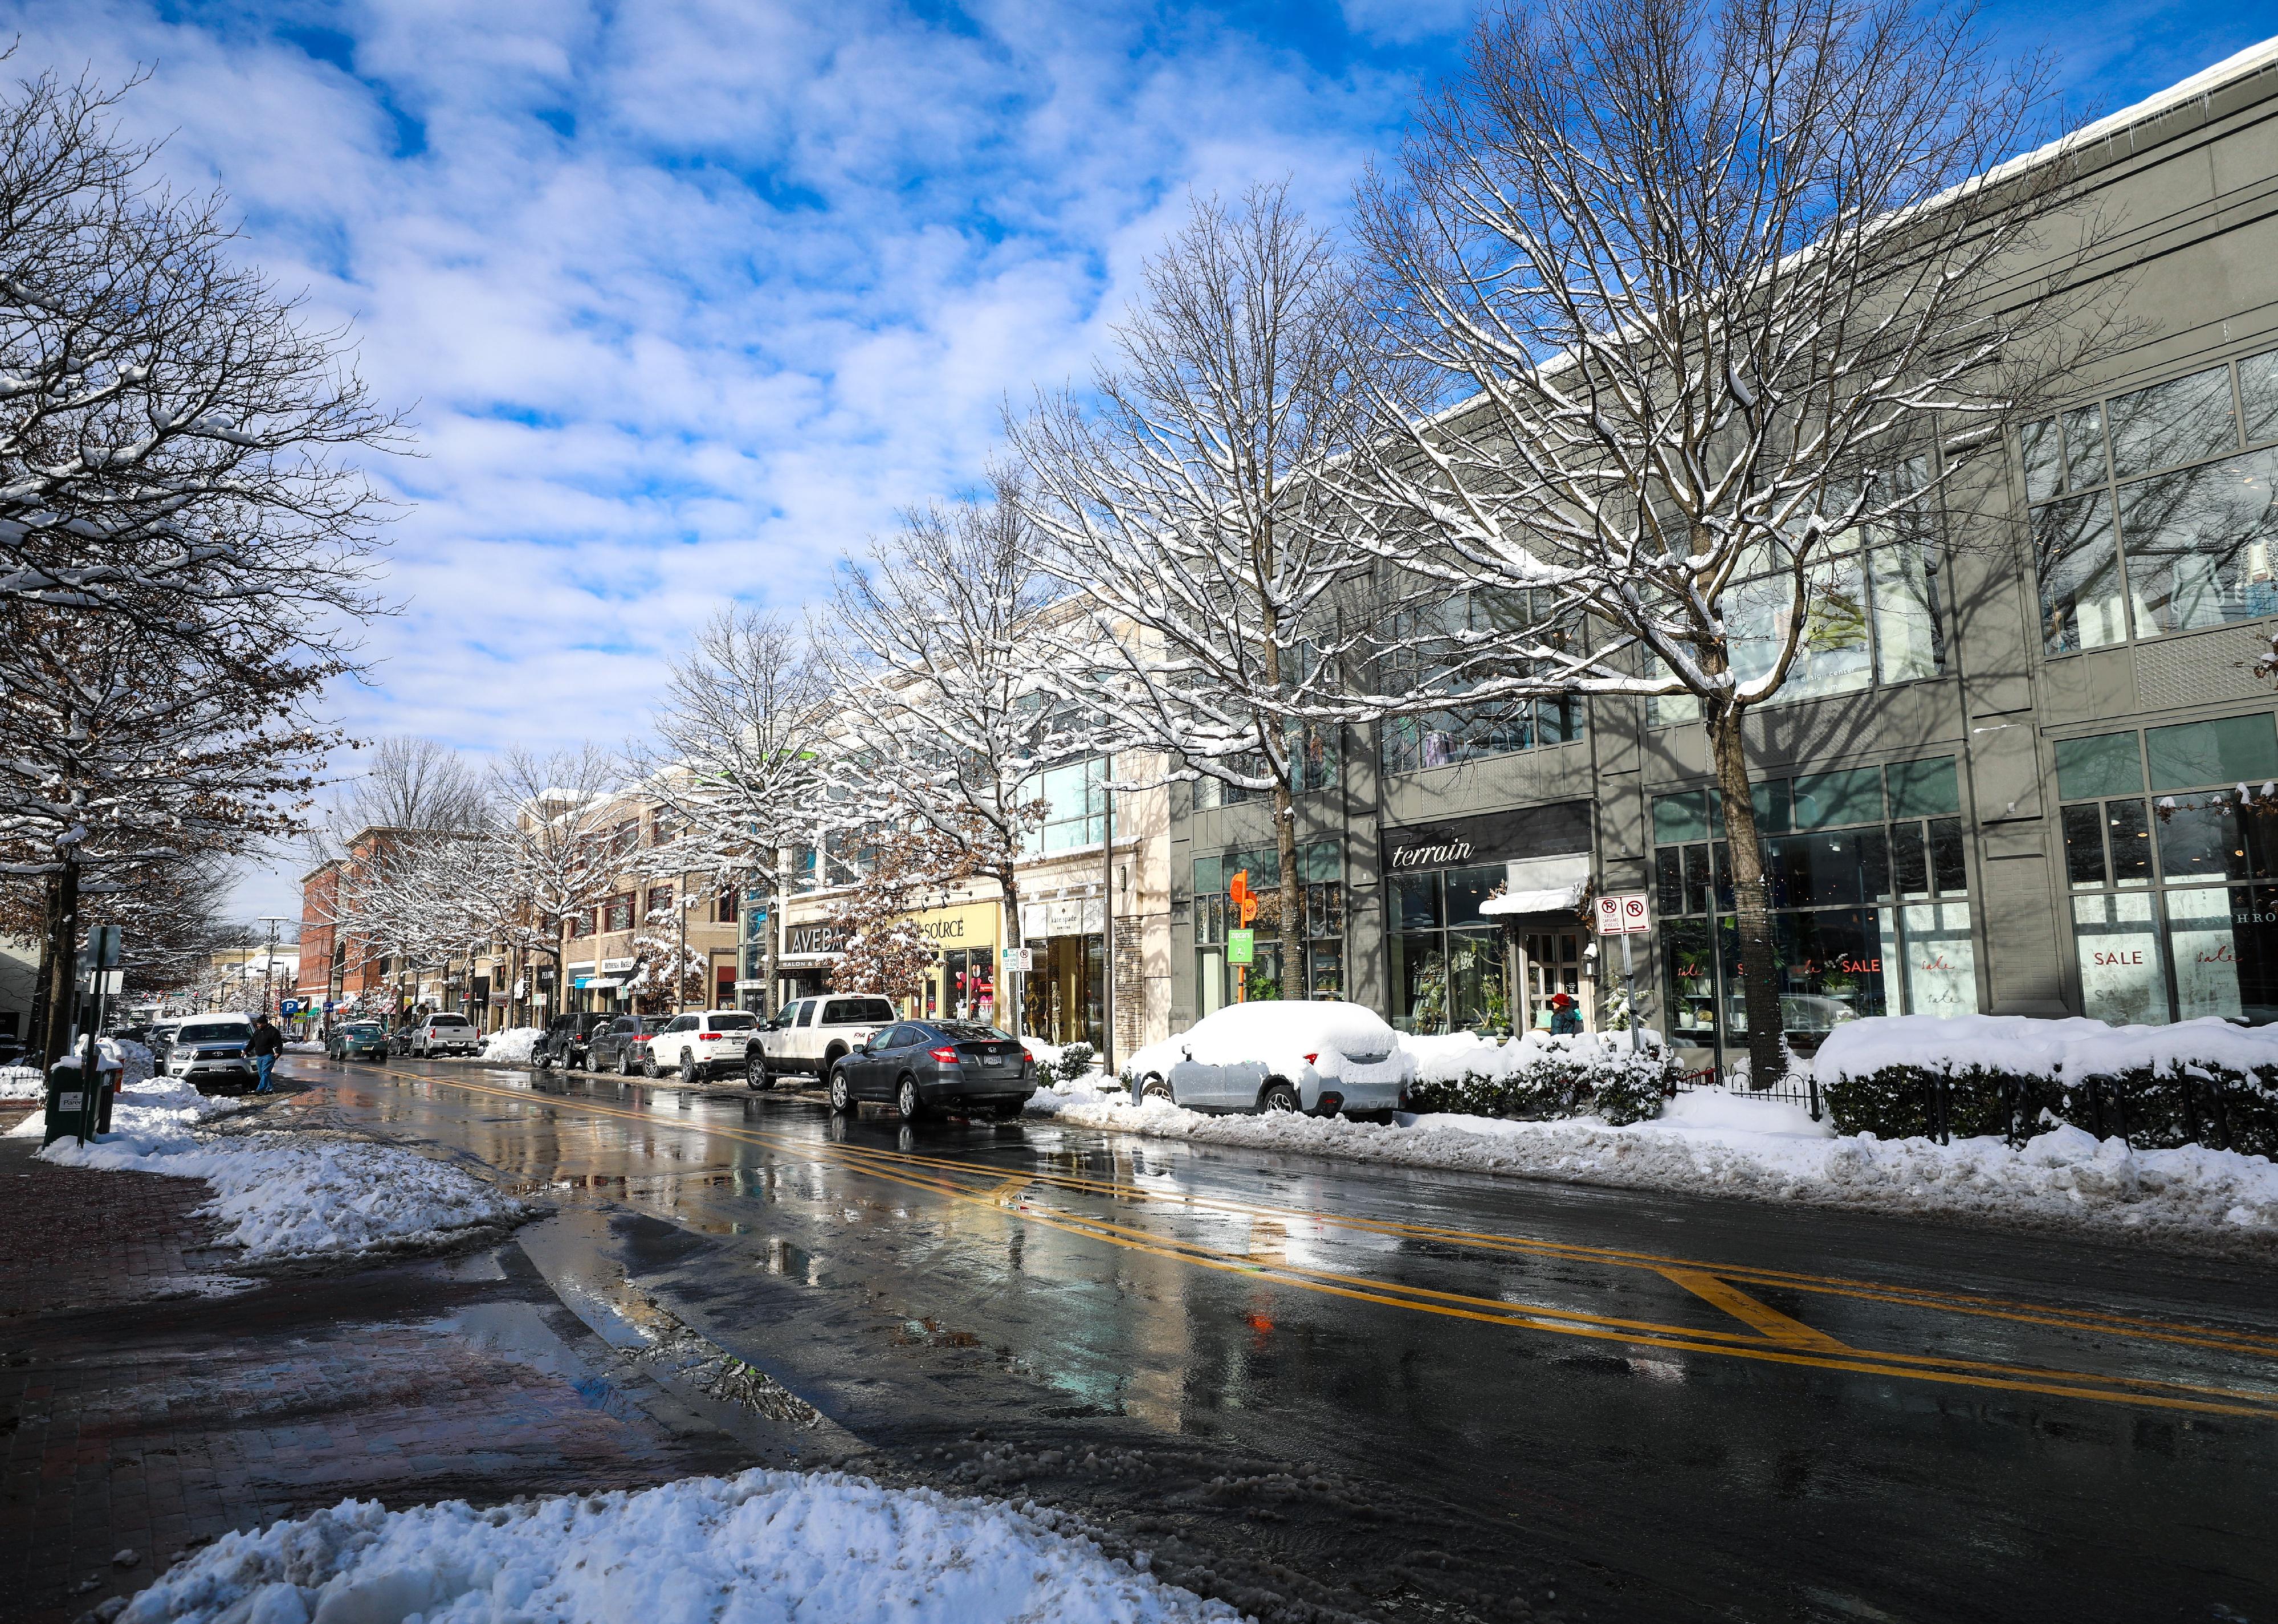 Snow blankets downtown Bethesda